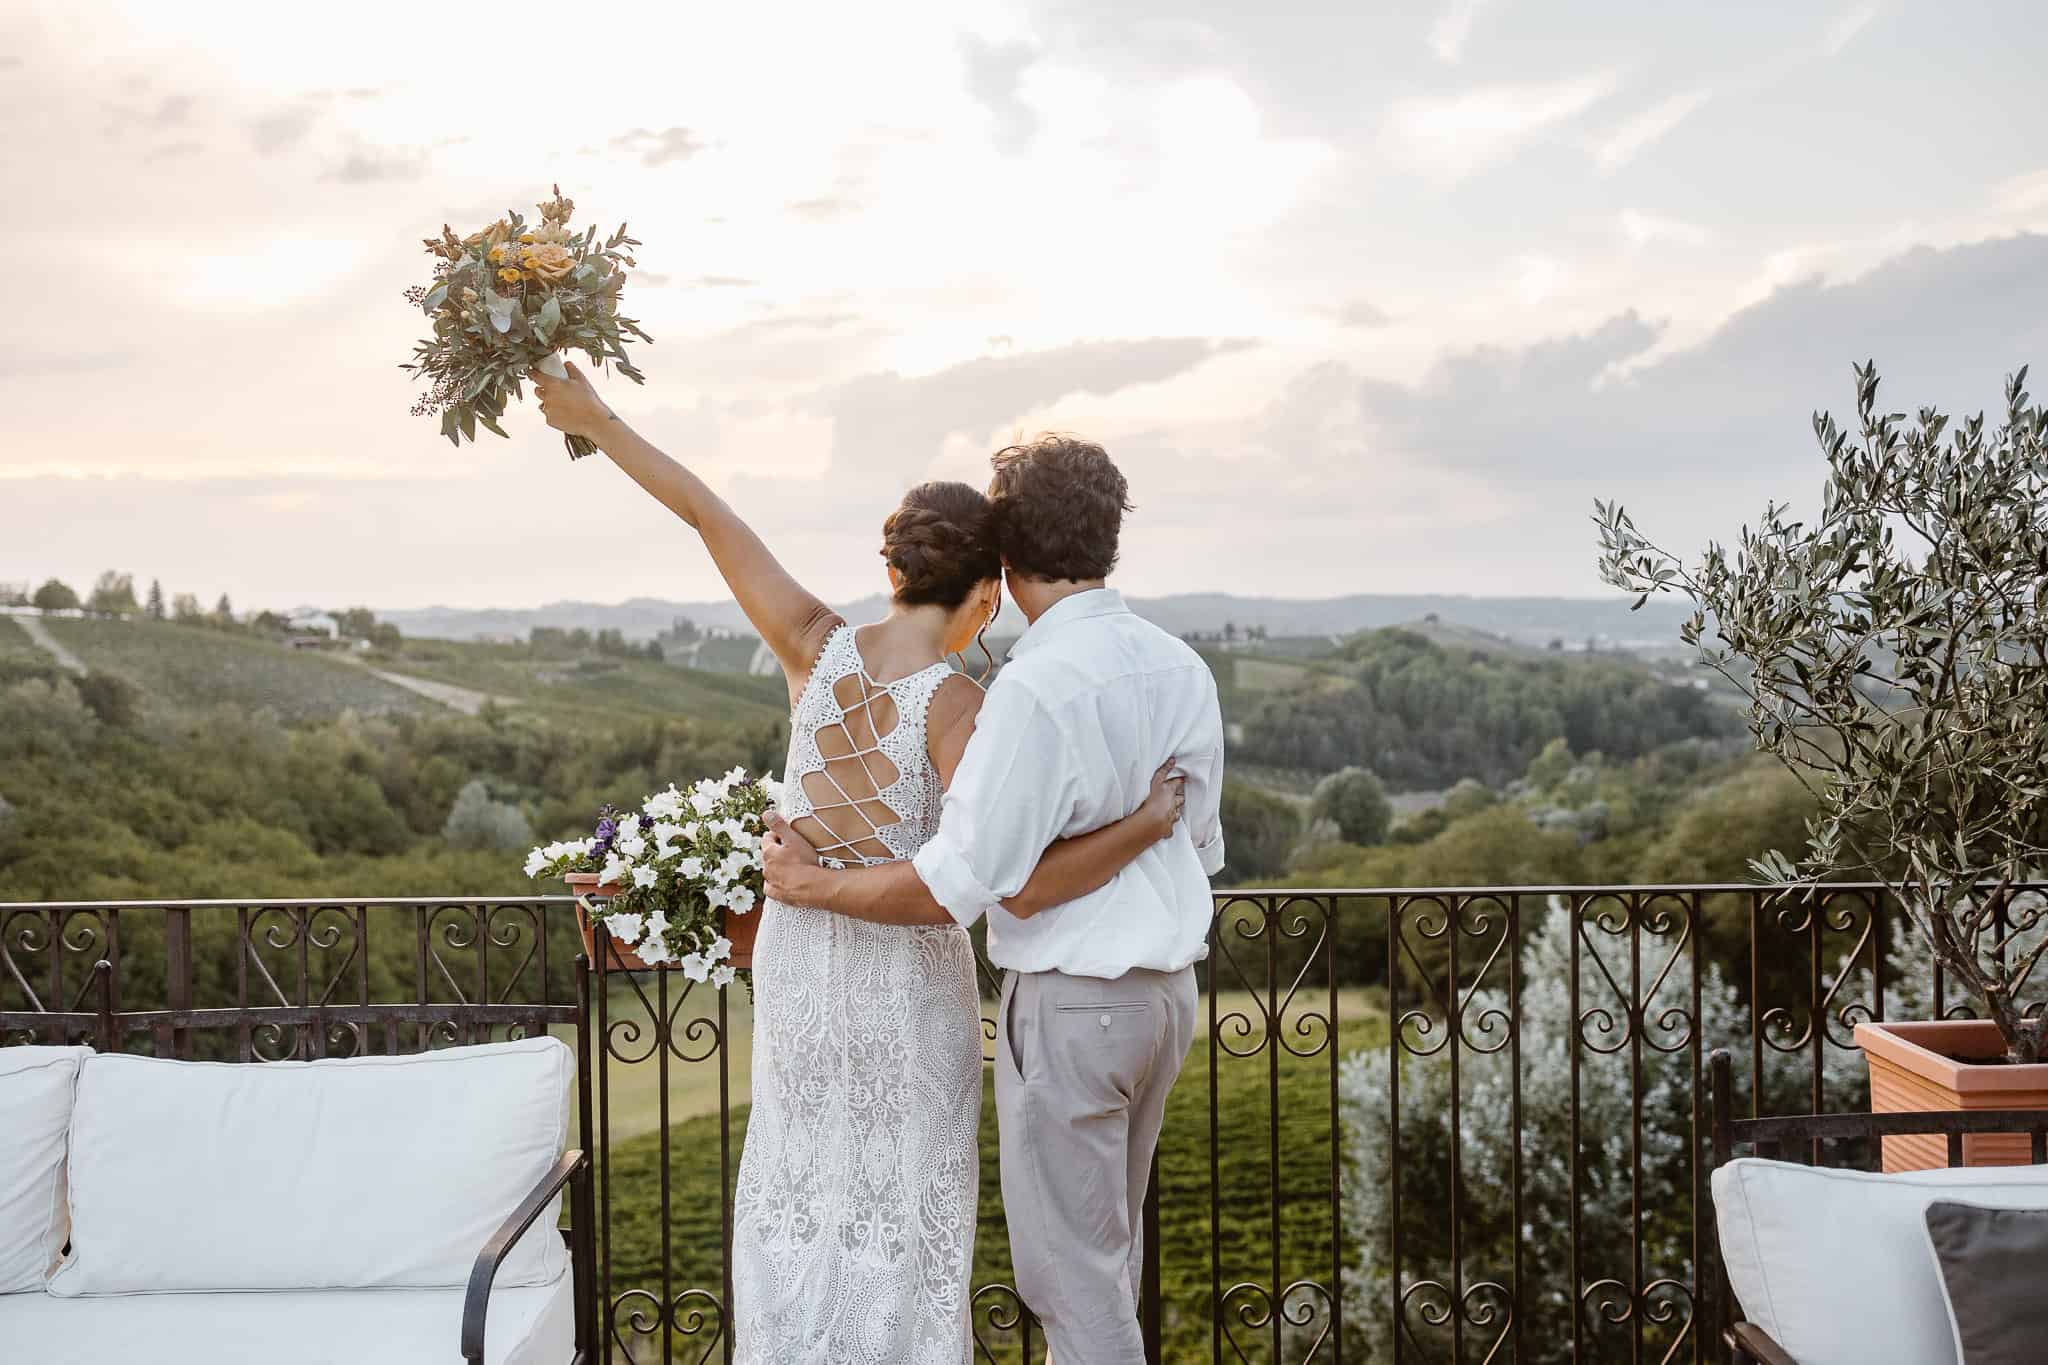 Bride and groom look to vineyards lanscape in Piedmont after their Italy elopement.